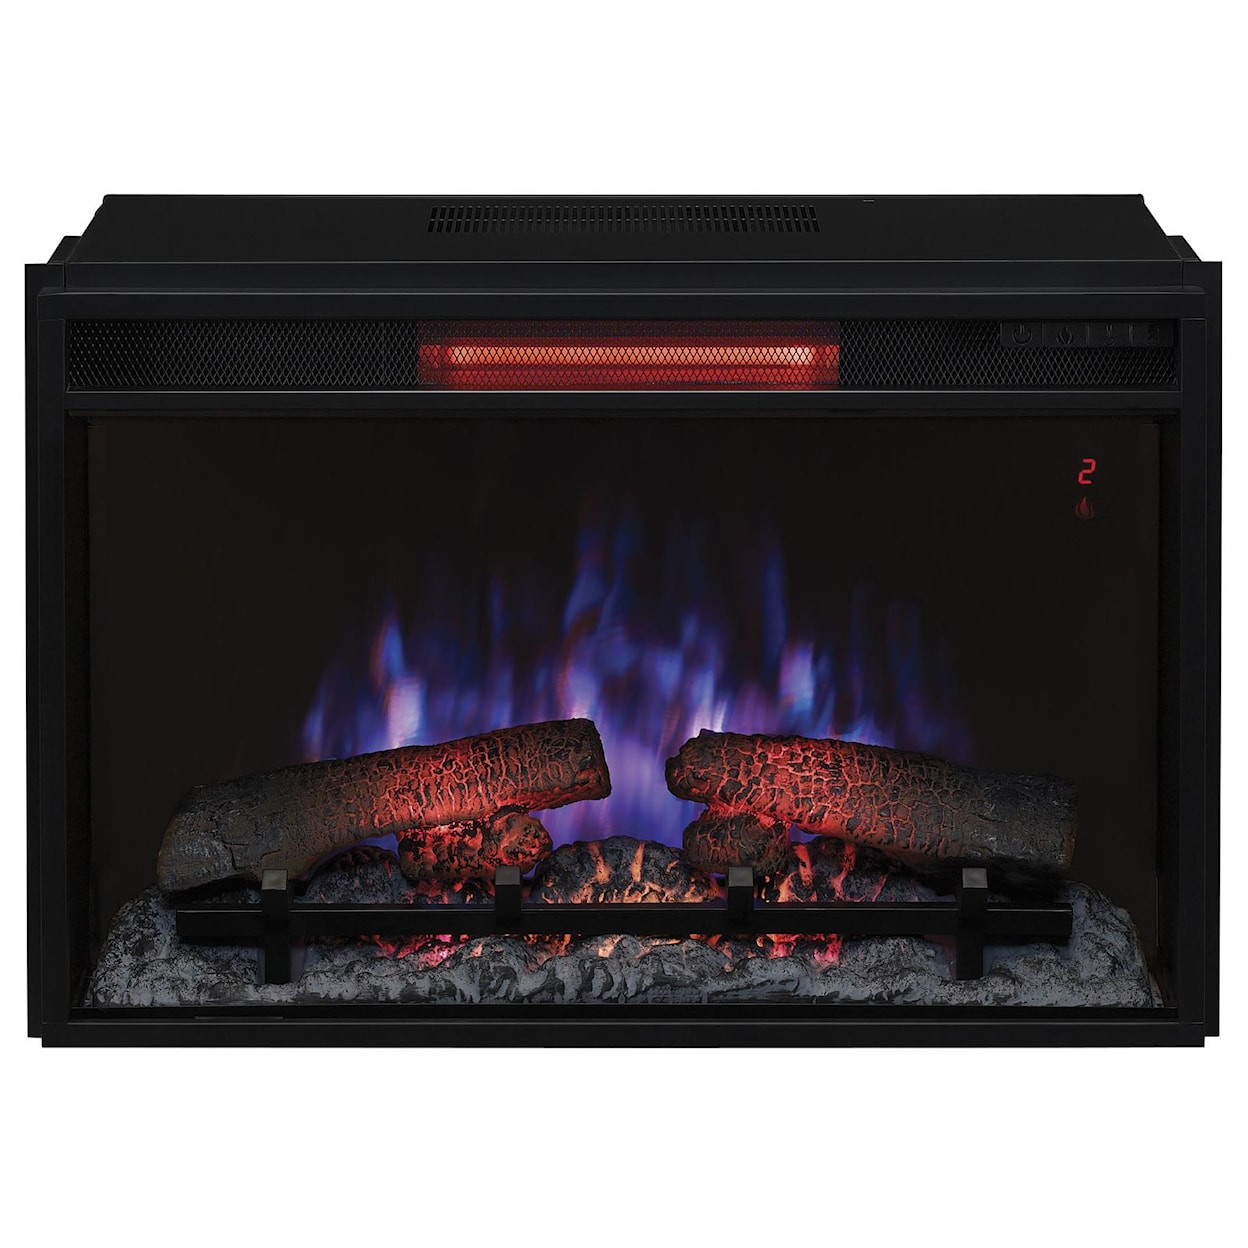 ClassicFlame Fireplace Inserts 26" Spectrafire+ Electric Insert